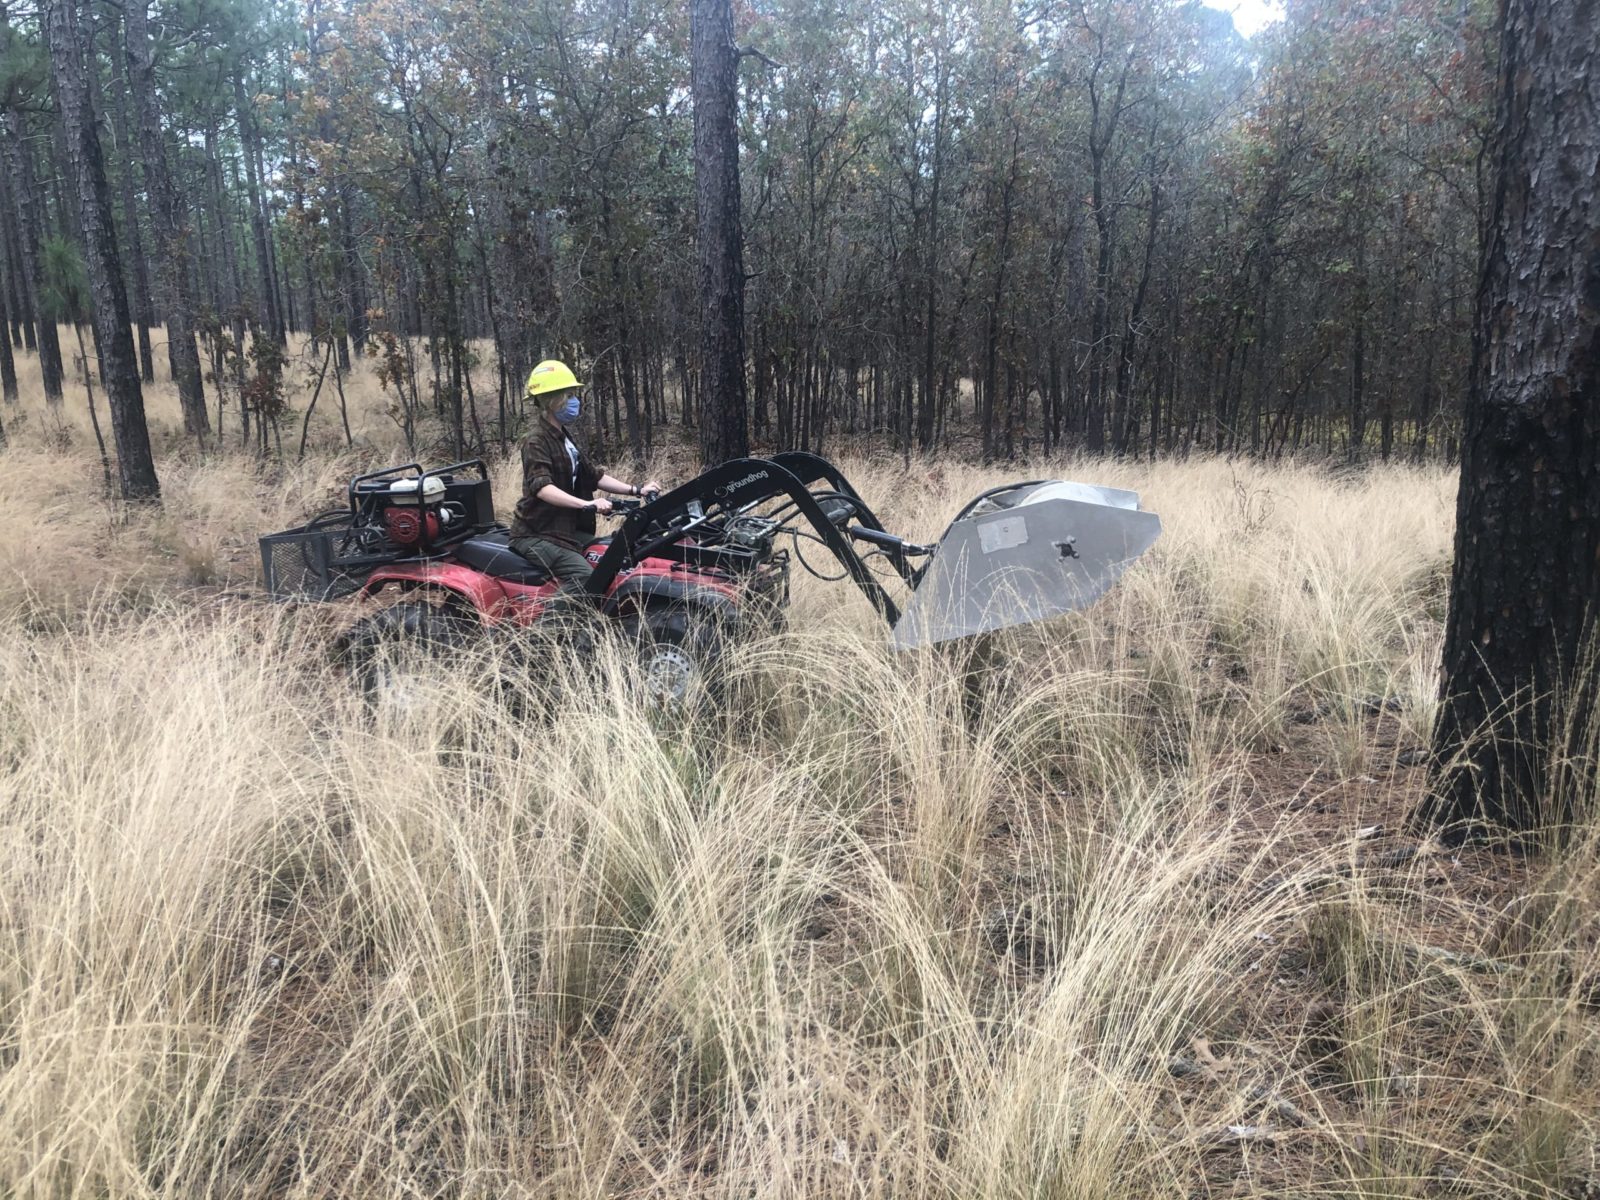 A seed harvester, or flail vac, is crucial in gathering sufficient native seed to conduct native groundcover restoration at scale. Carvers Creek State Park, NC. Photo by Thomas Crate.